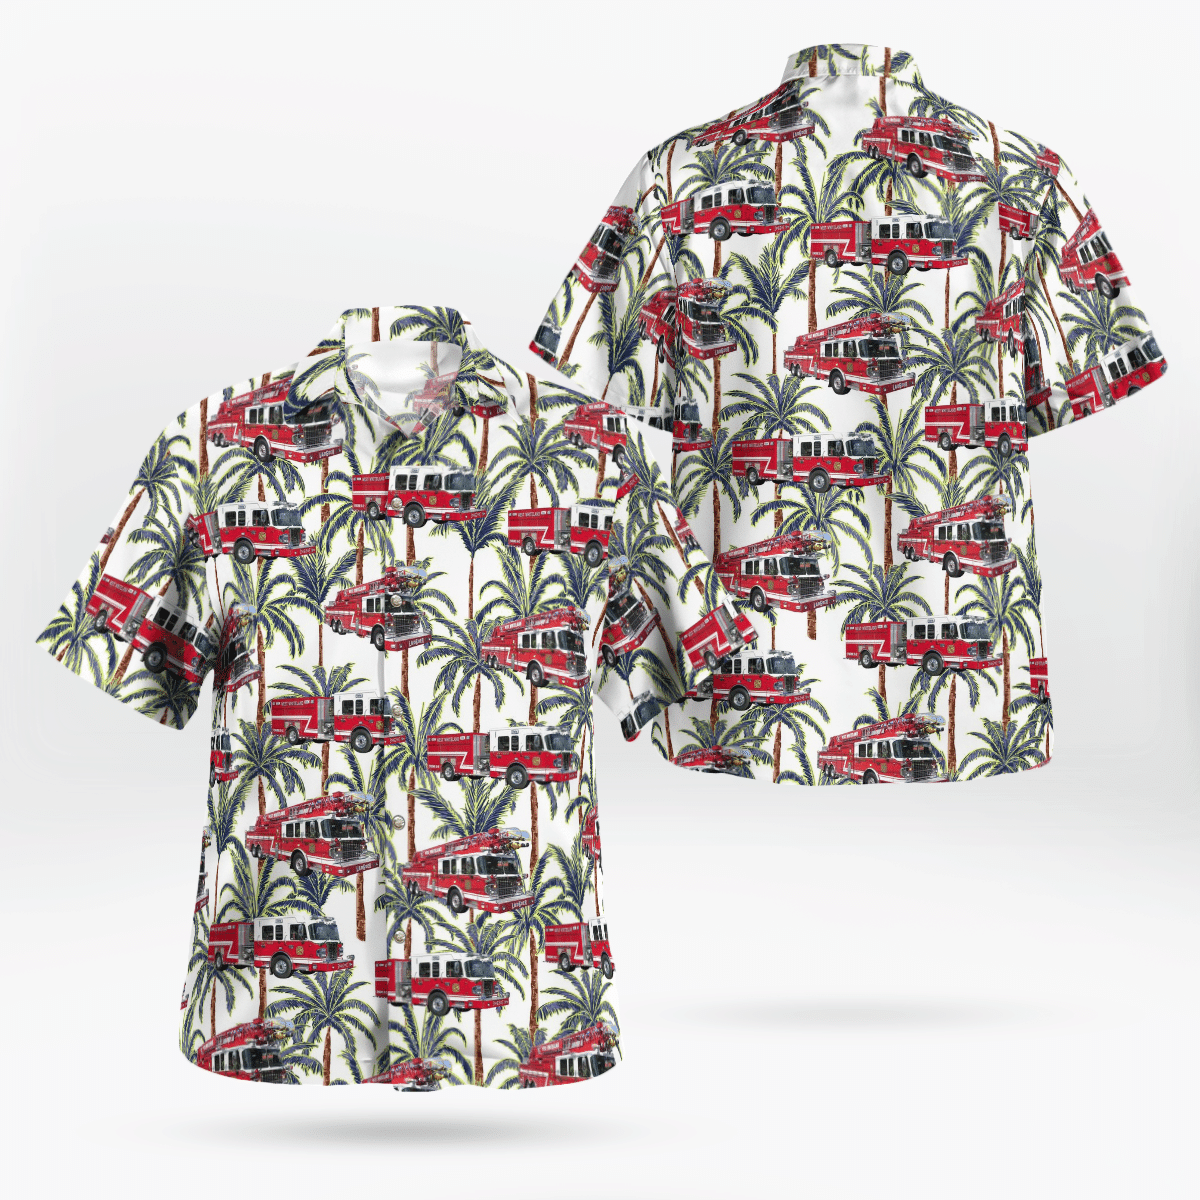 If you want to be noticed, wear These Trendy Hawaiian Shirt 125